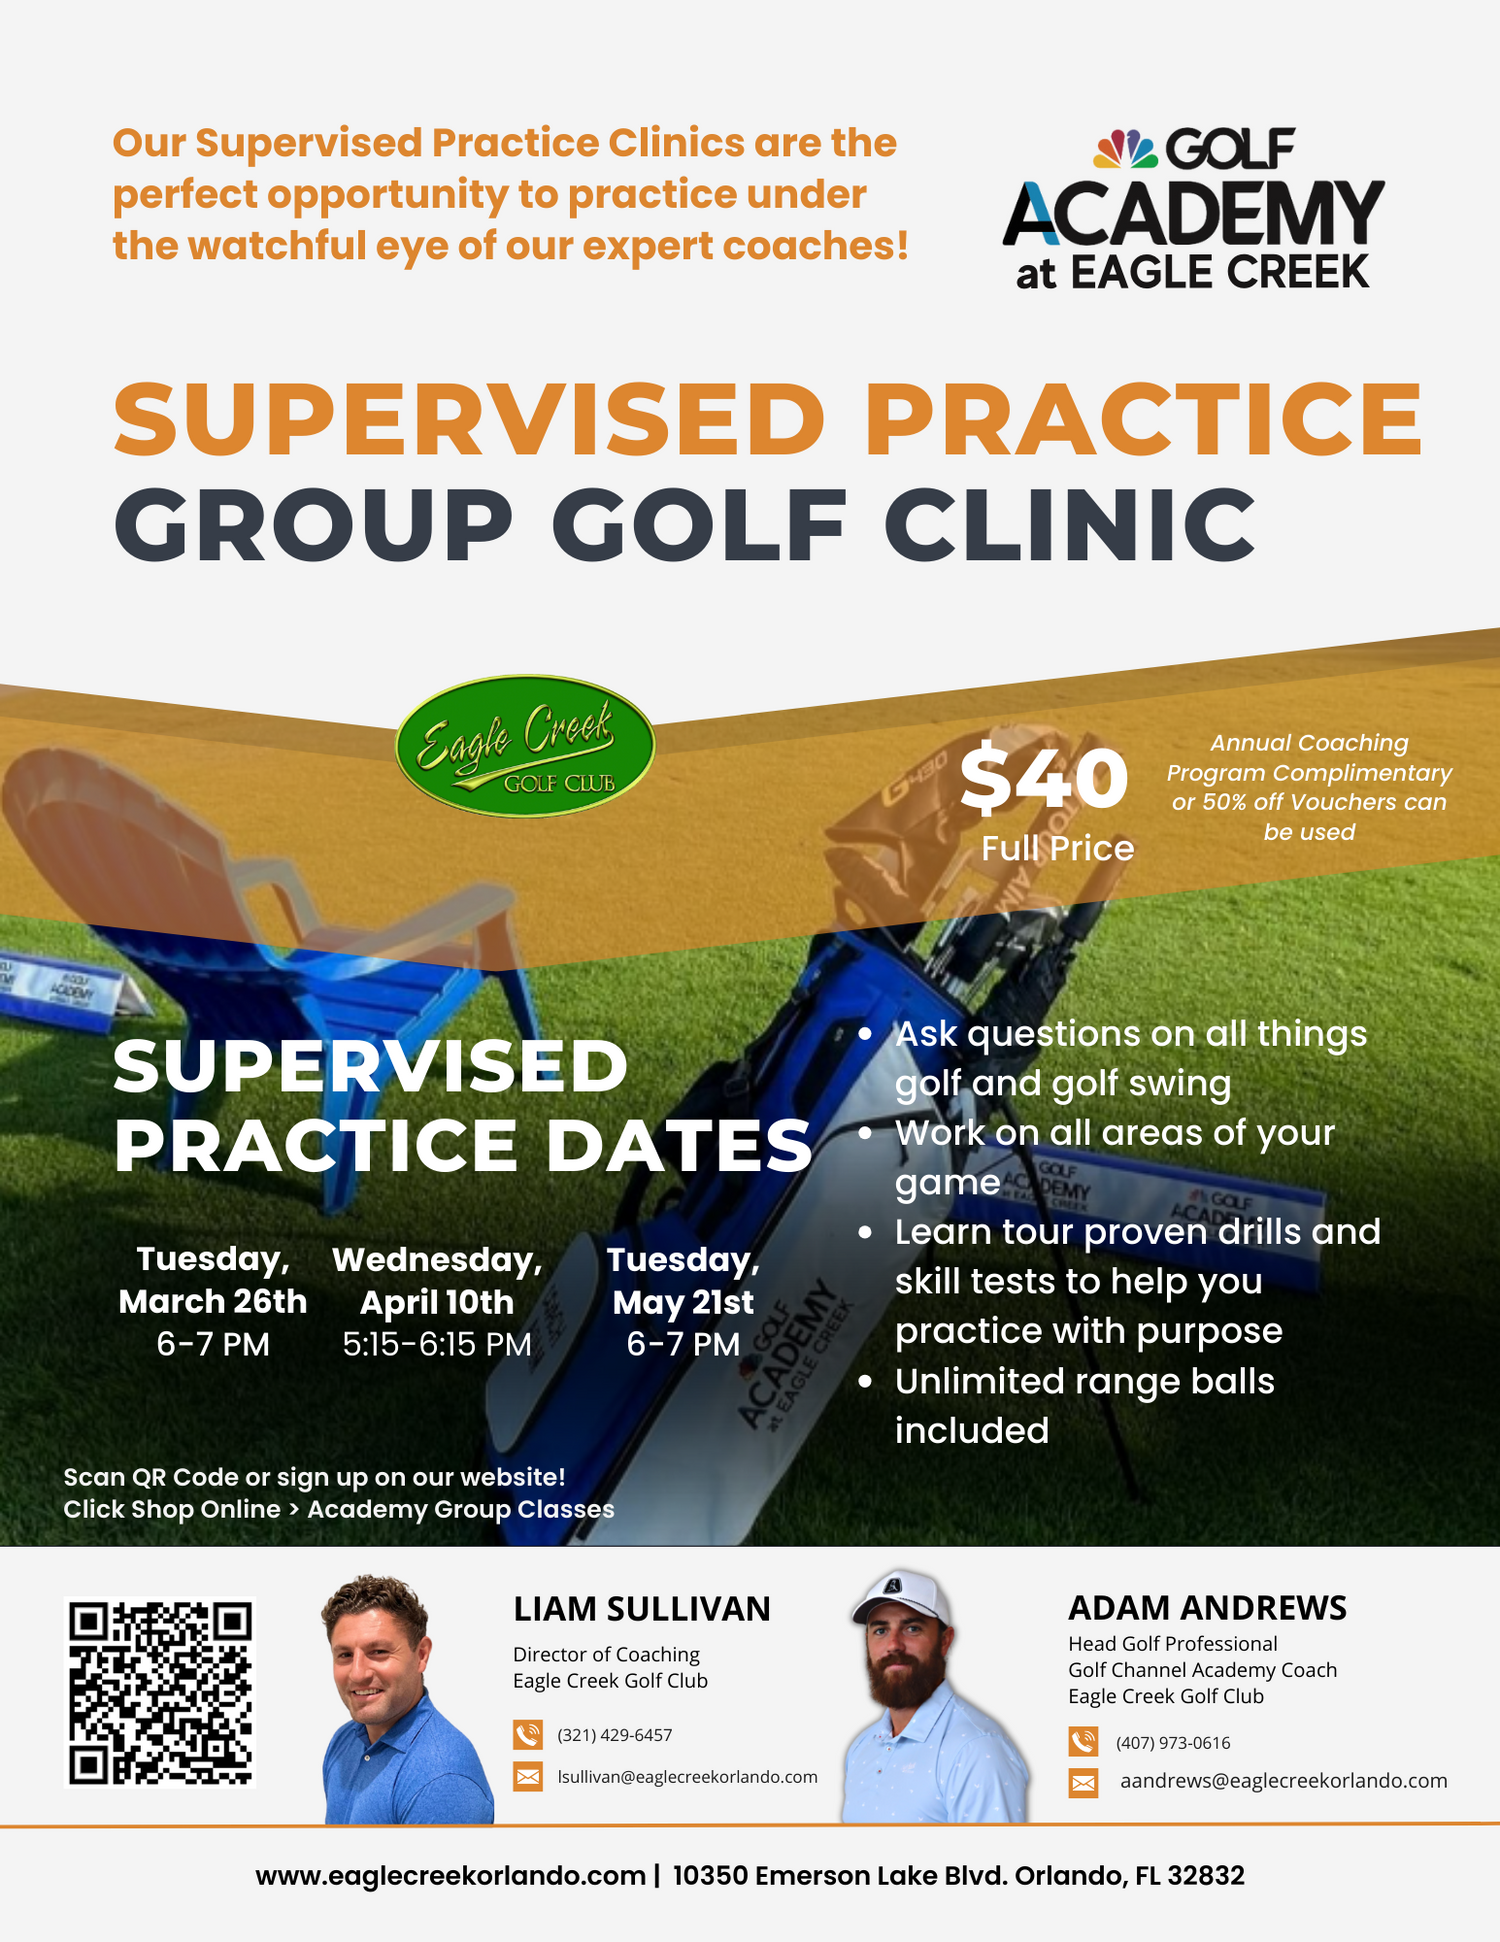 May Group Coaching Classes at The Golf Academy at Eagle Creek